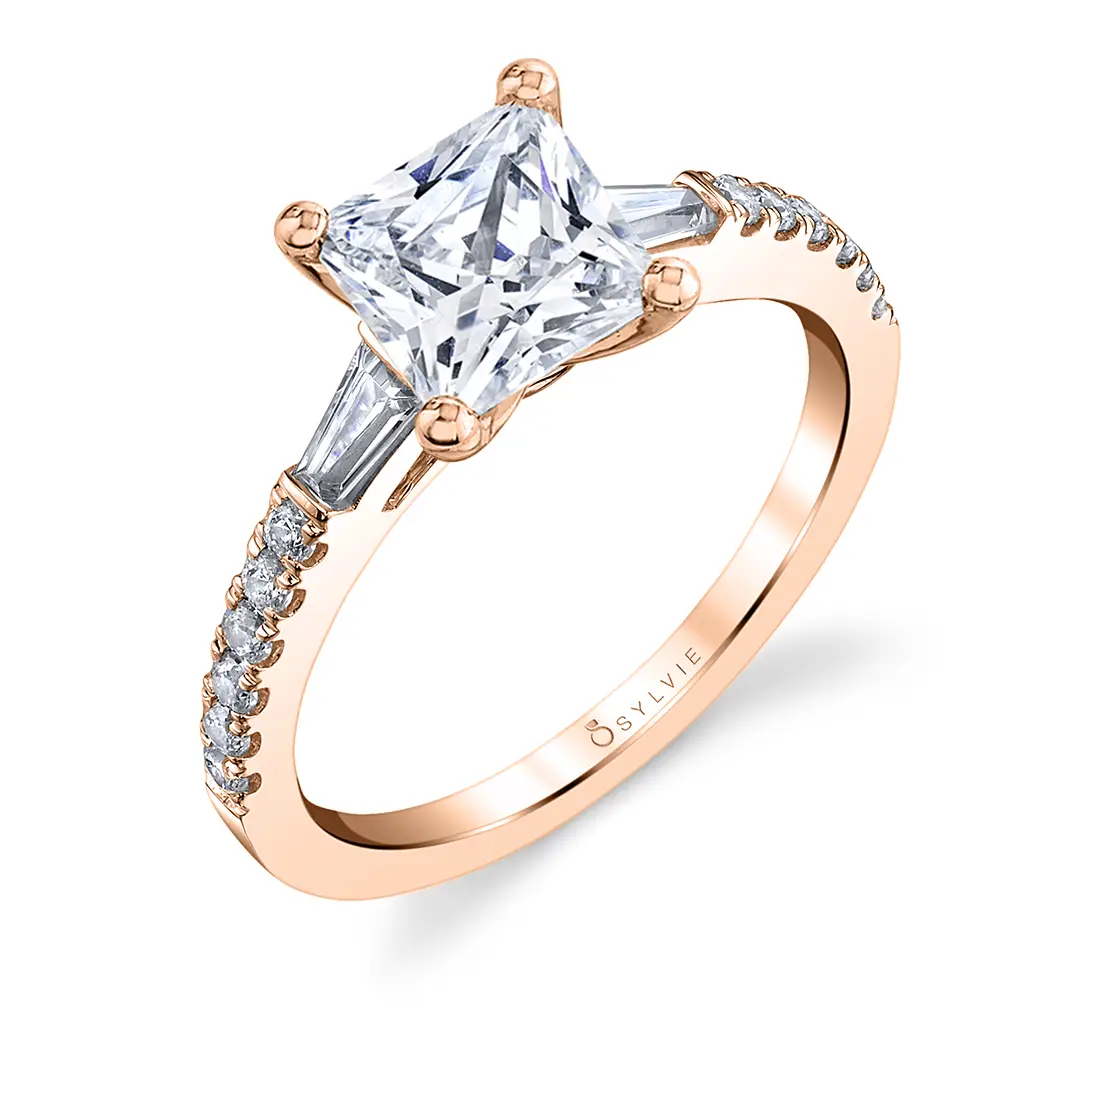 Princess Cut Three Stone Engagement Ring with Baguettes - Leigh Ann ...